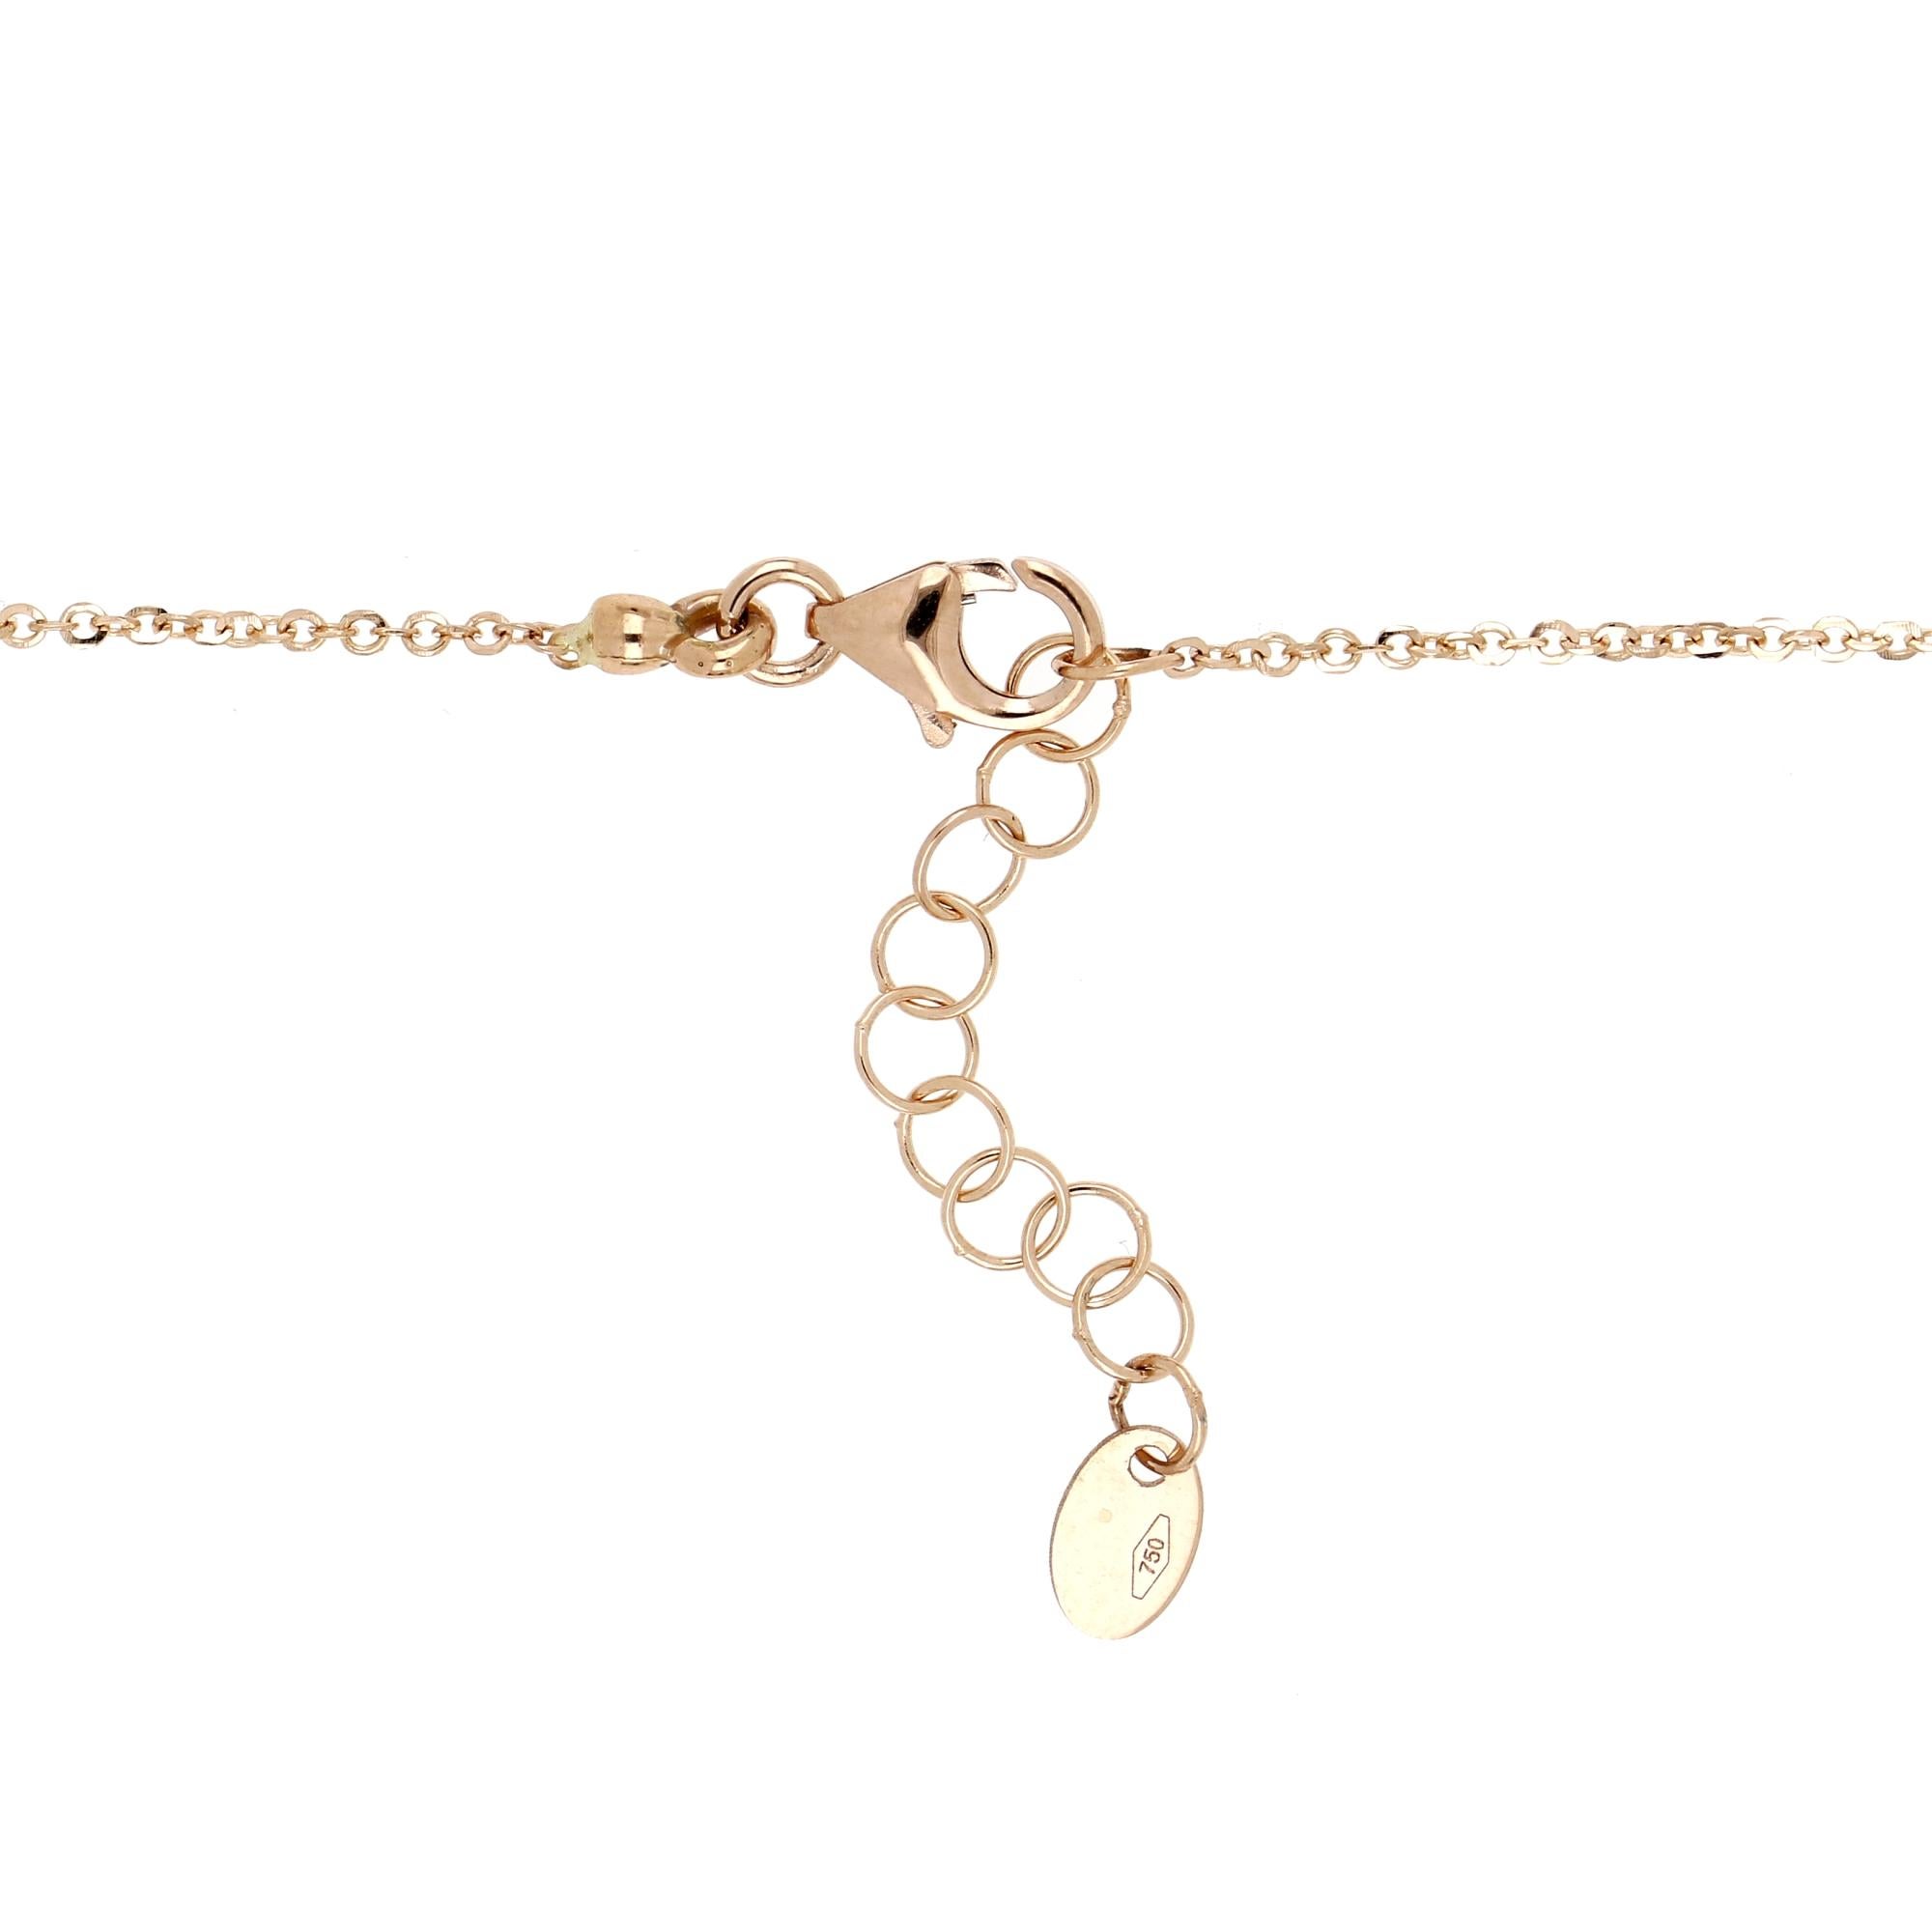 Delicate gold necklace characterized by a pendant with a stone wrapped in a pavè of paraiba that give a touch of freshness to the jewel. The stone seems to blossom like a spring gem. Three diamonds enrich the jewel. 

18 kt rose gold necklace in